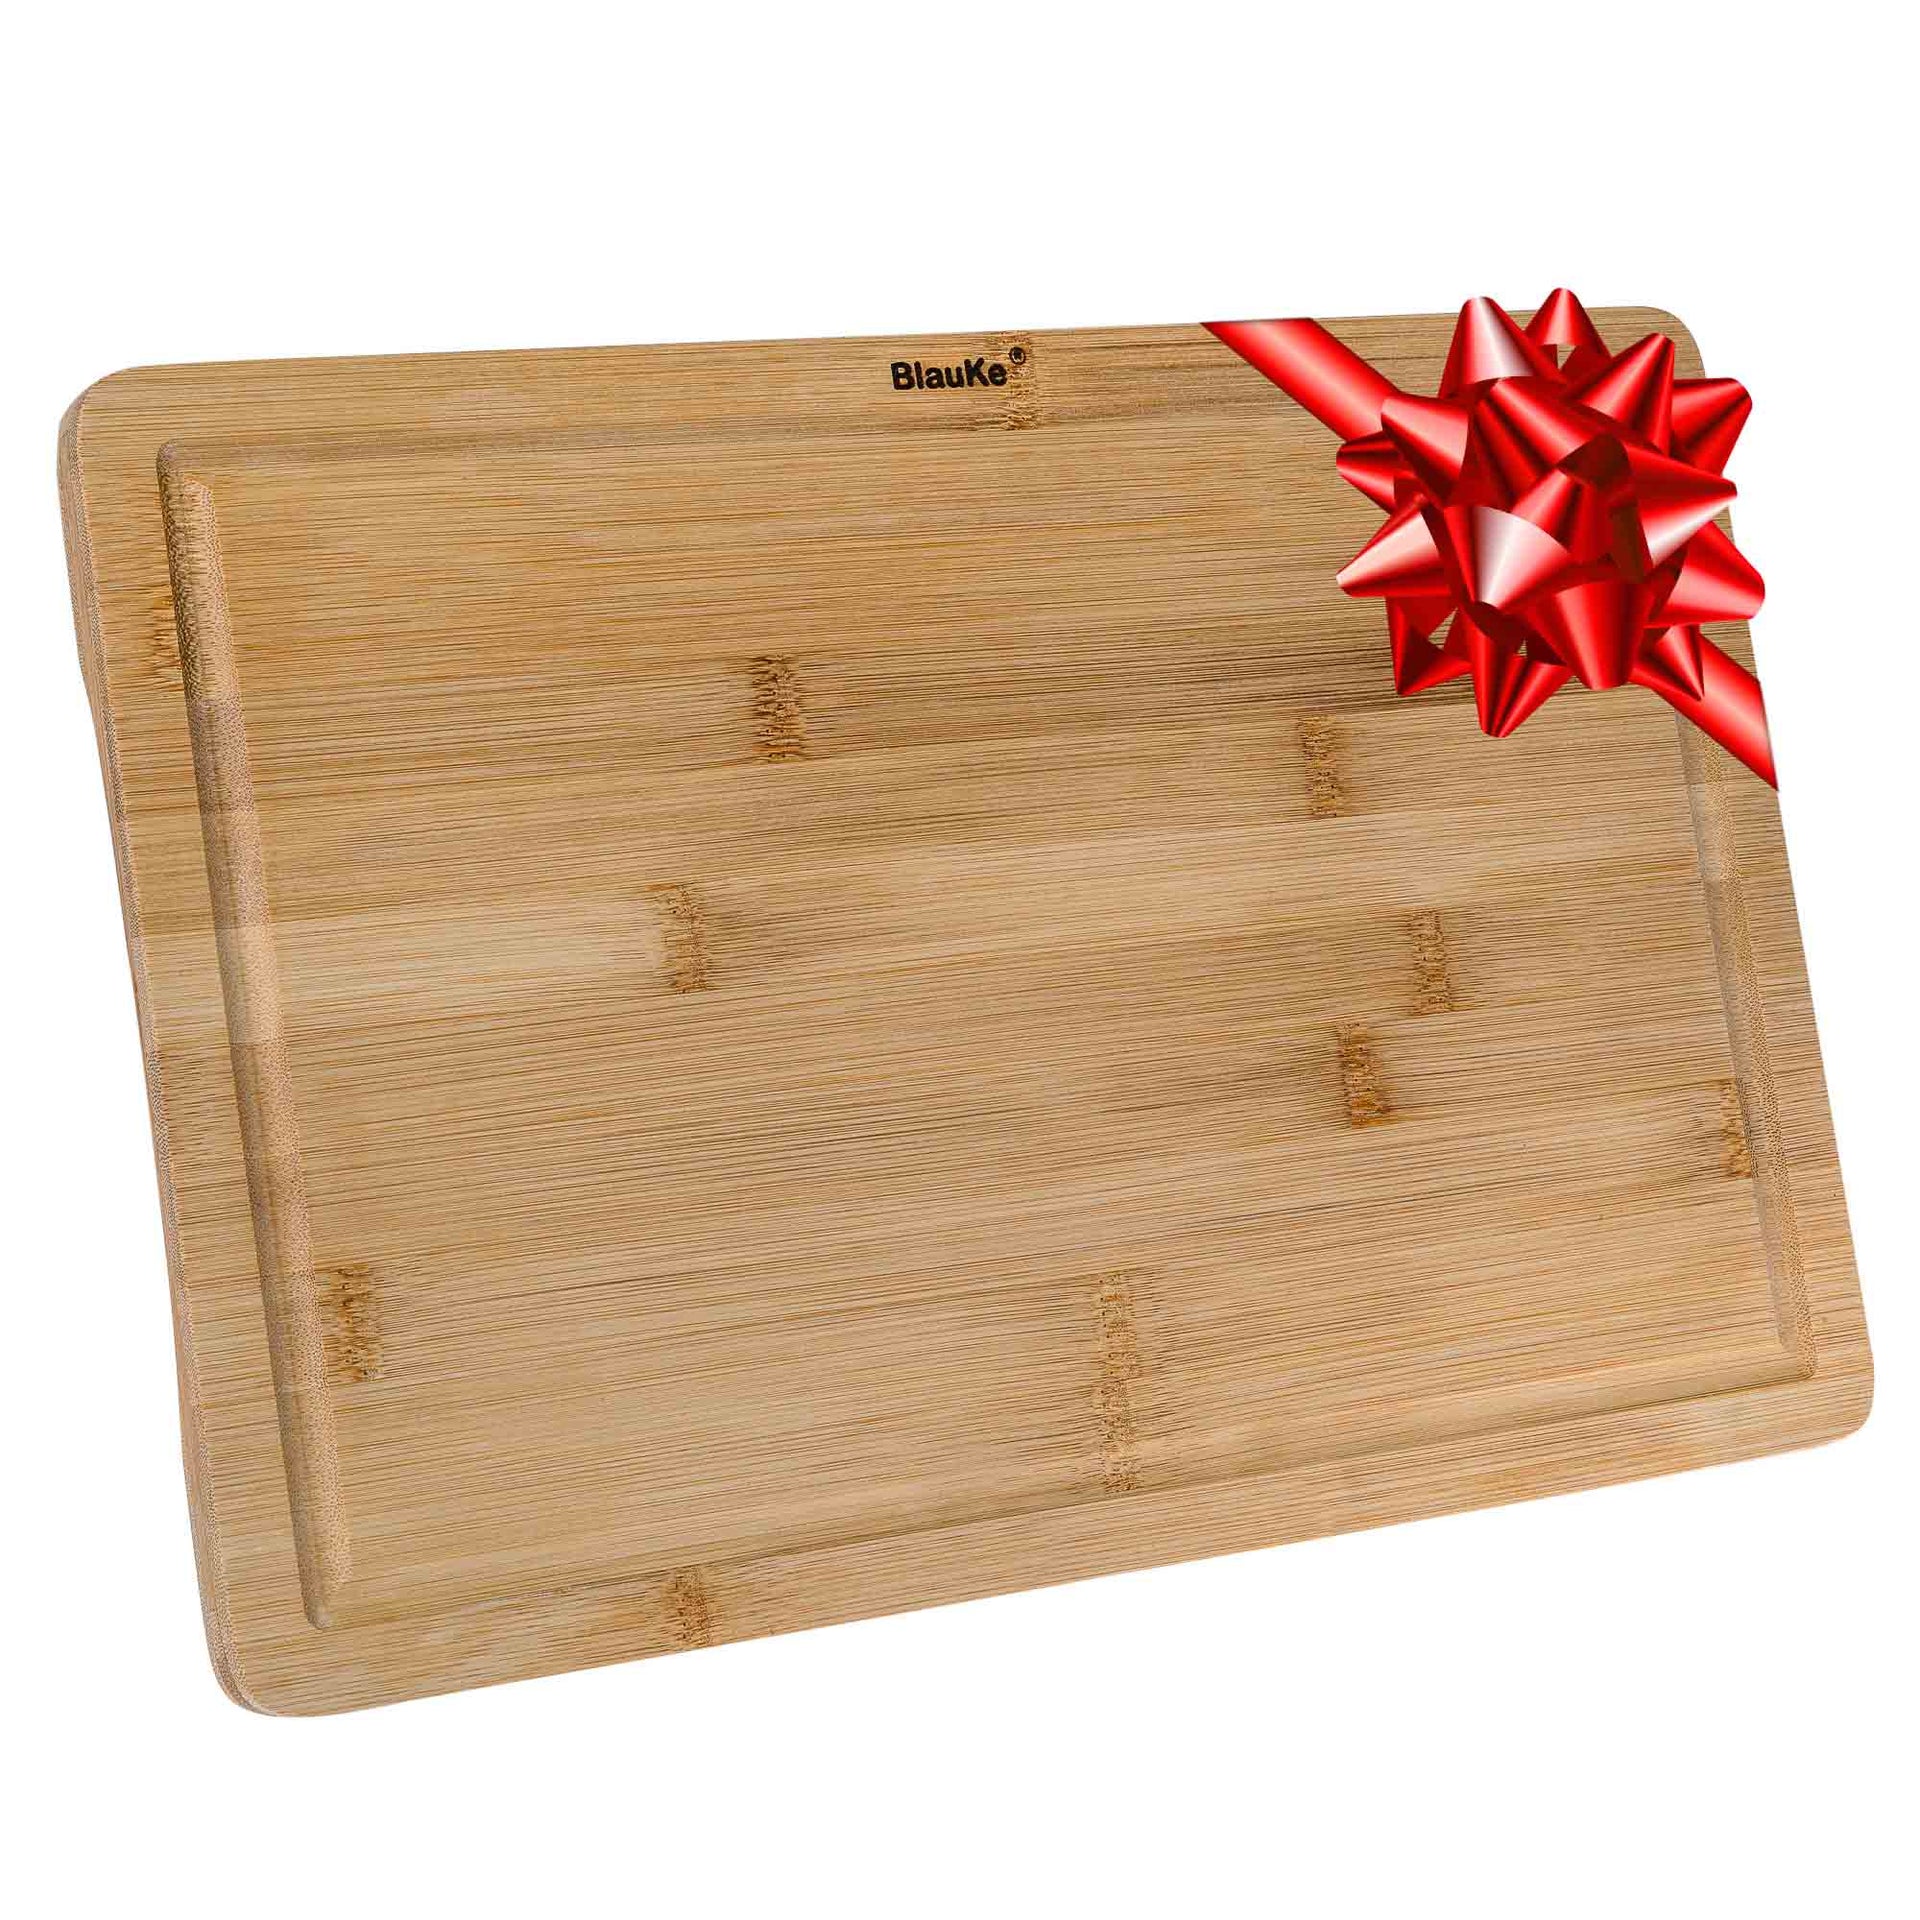 Wood Cutting Board for Kitchen 15x10 inch - Wooden Serving Tray - Mercantile Mountain